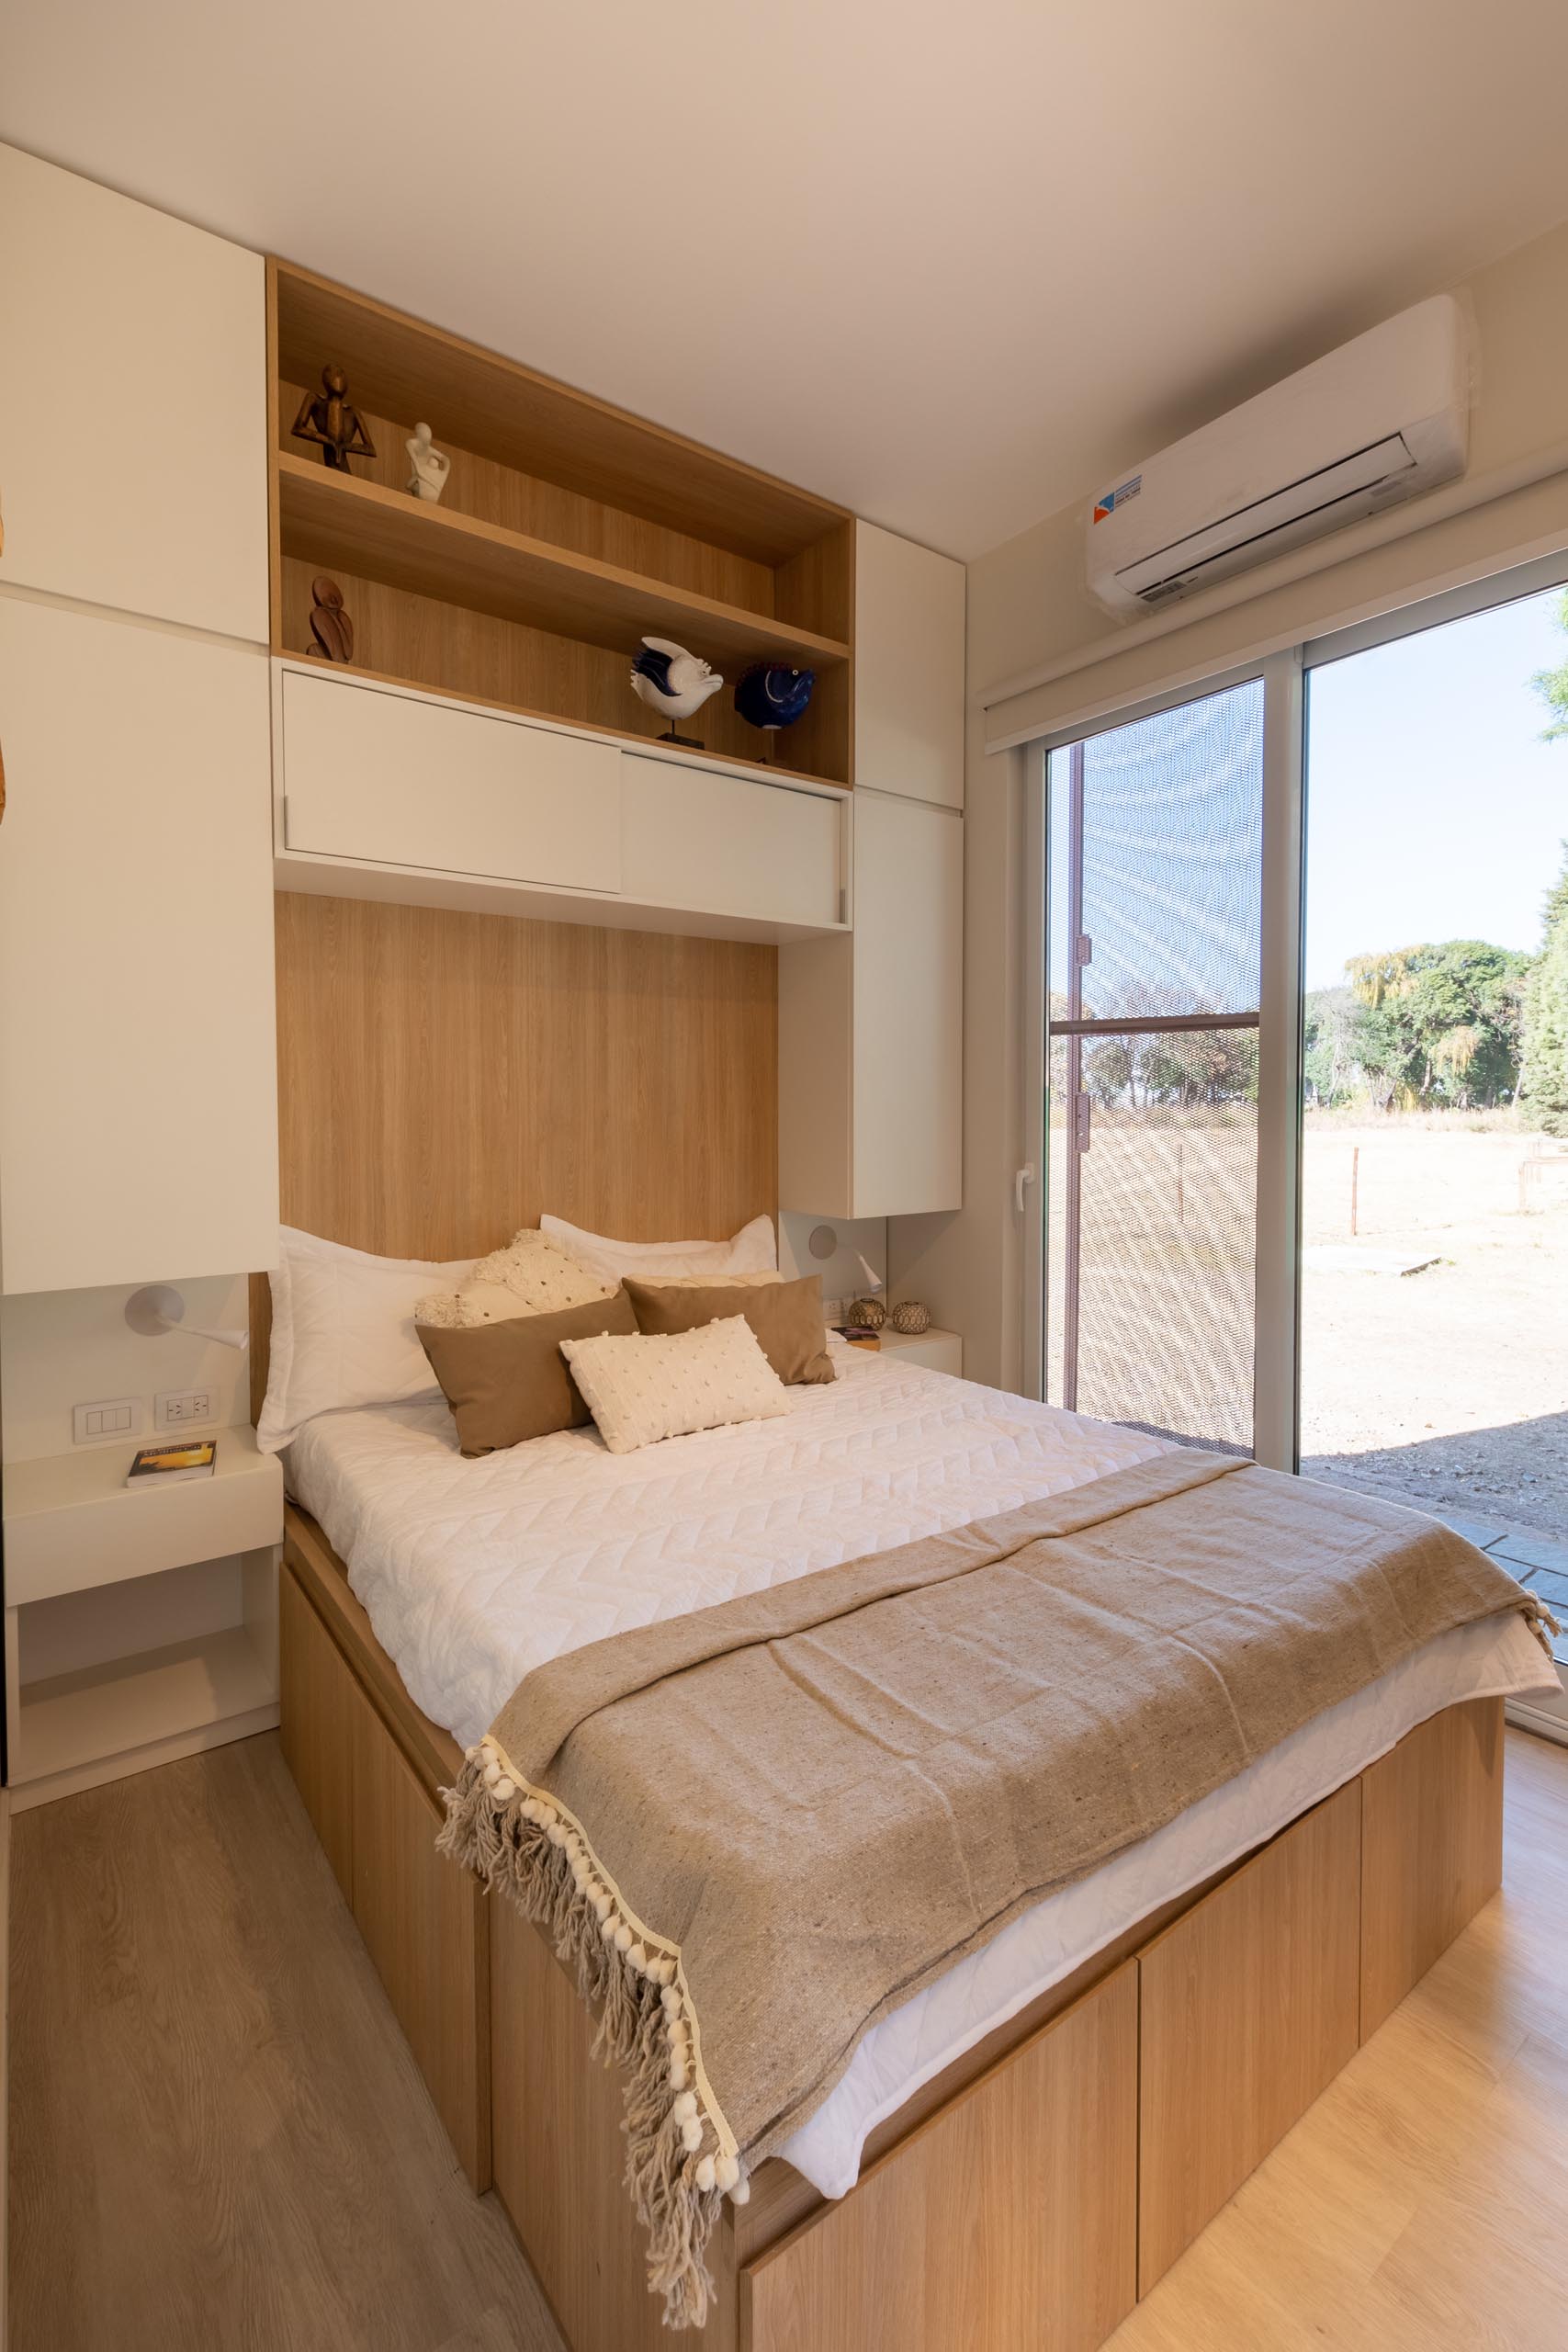 In this tiny home, there's a bedroom with a wood accent and shelving surrounded by white cabinetry. Opposite the bed is a closet with a mirrored front.